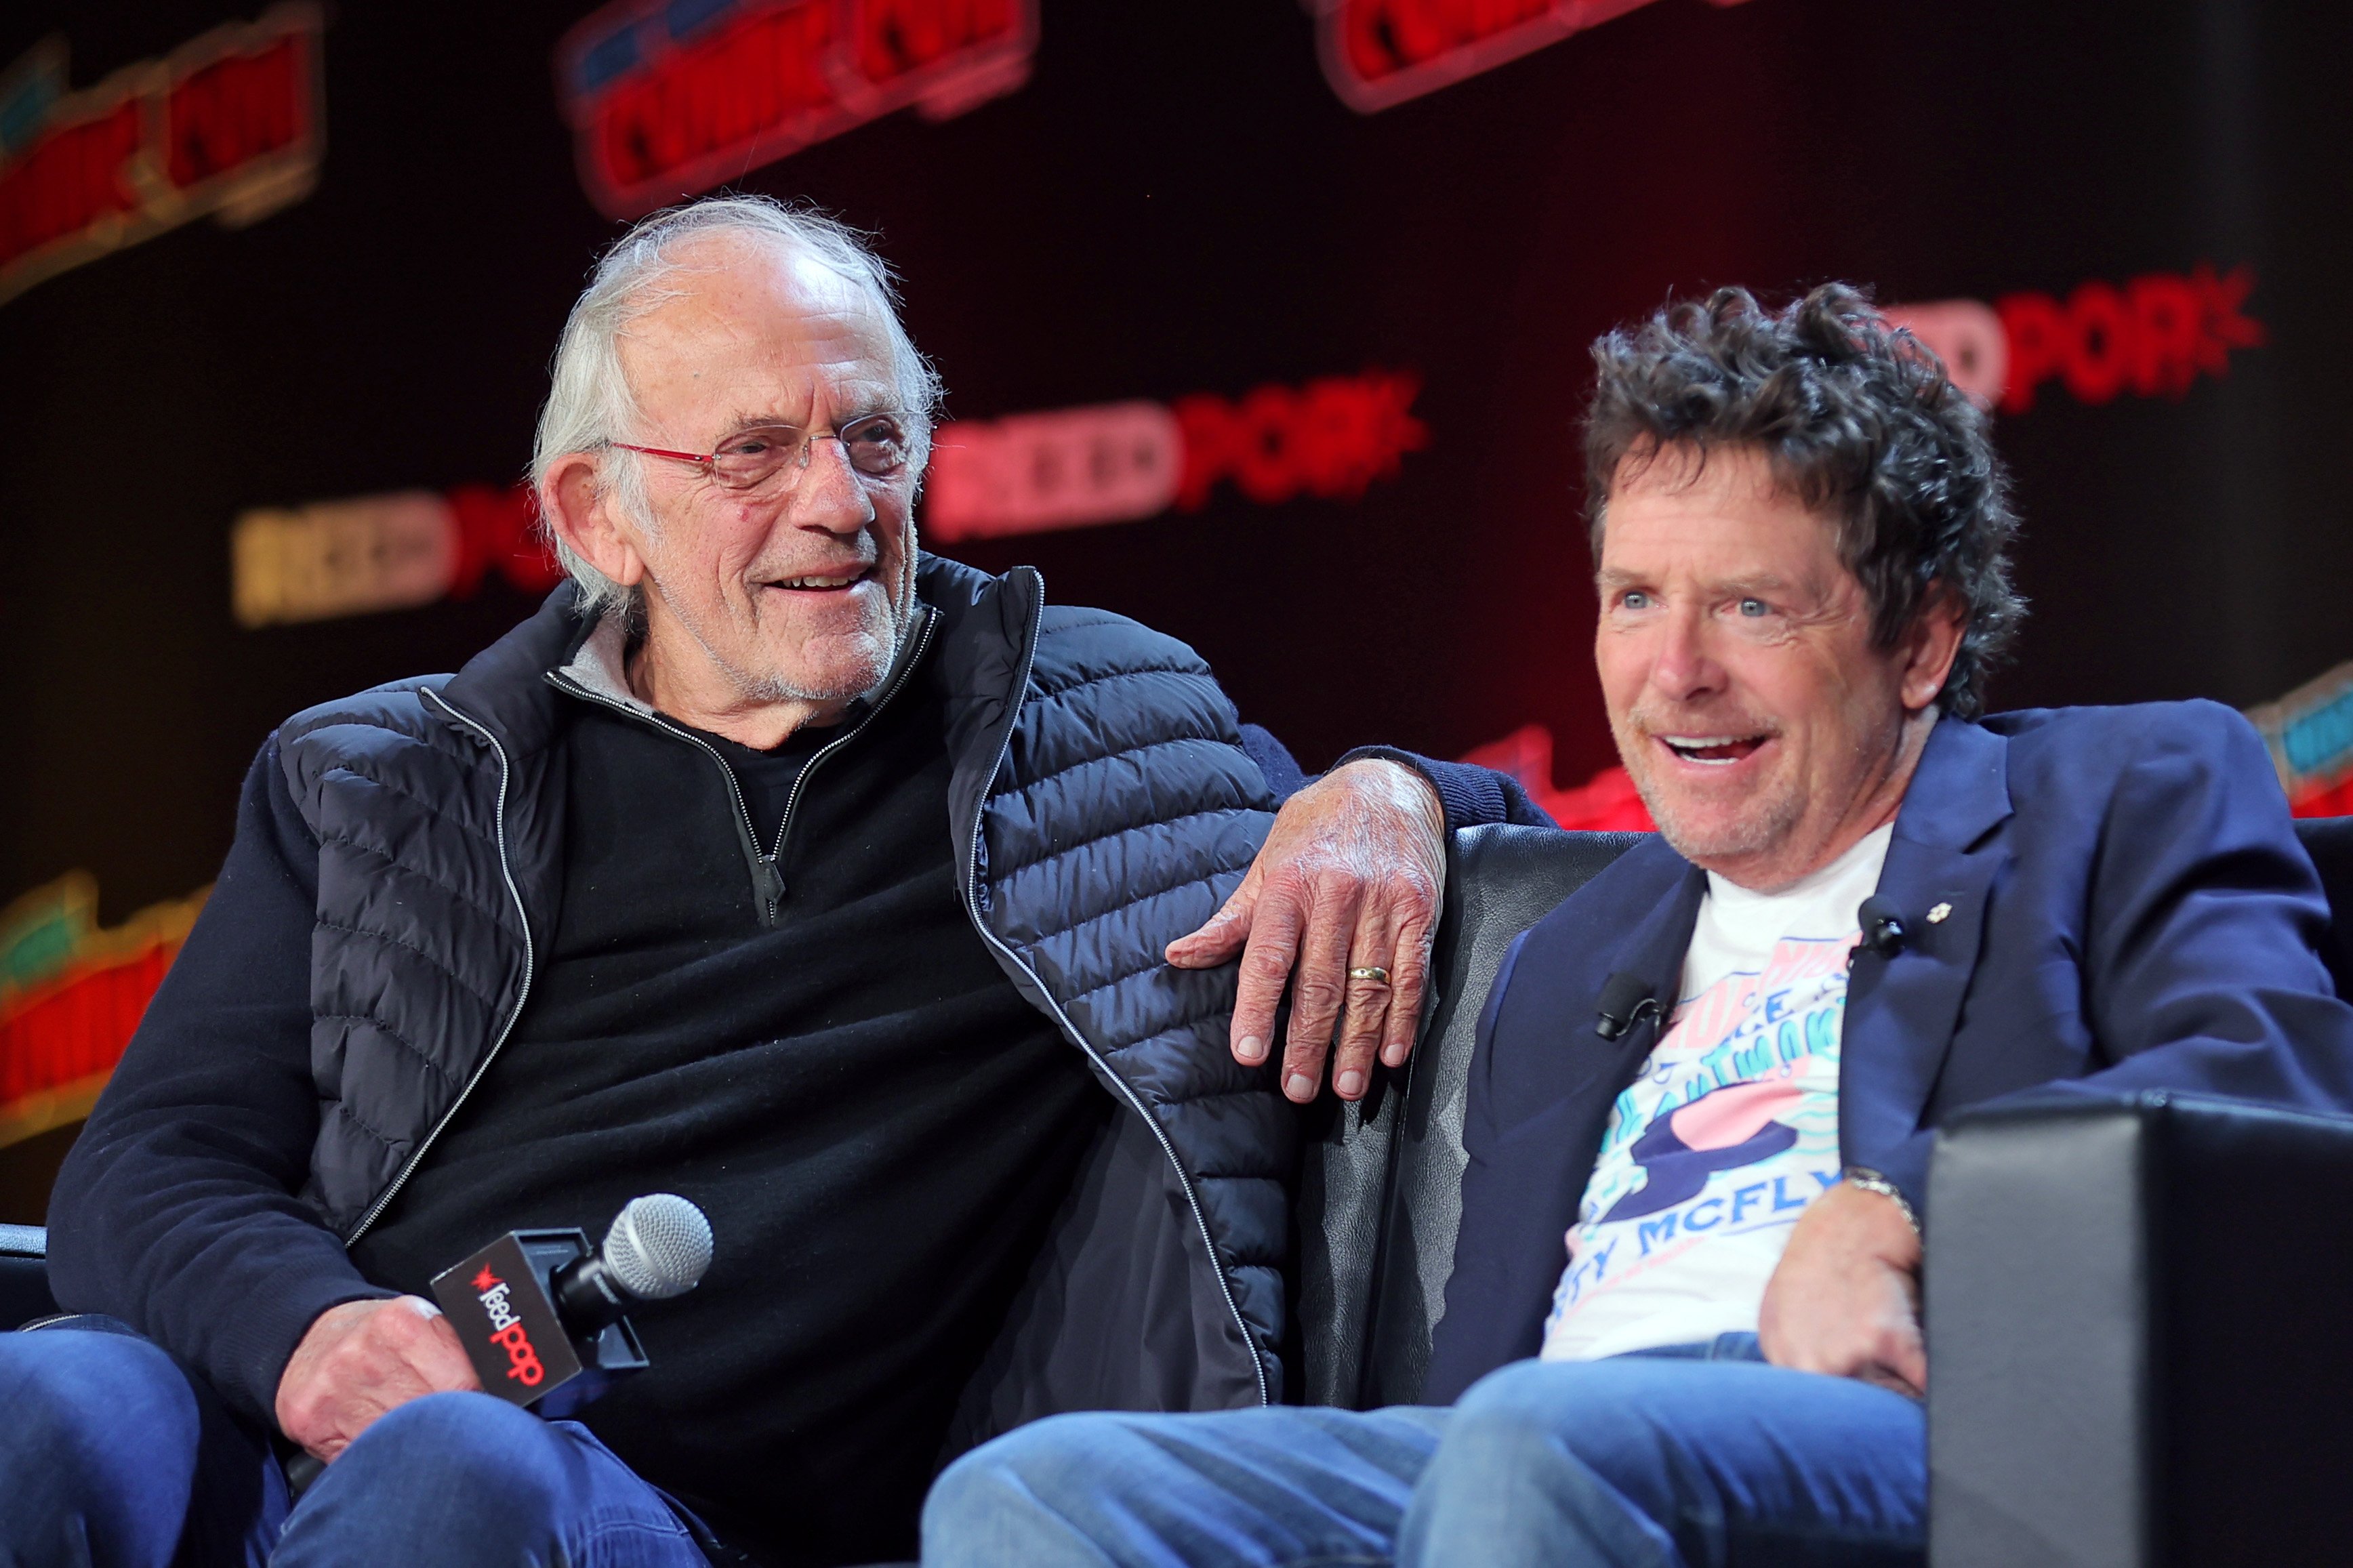 Christopher Lloyd and Michael J. Fox at a 